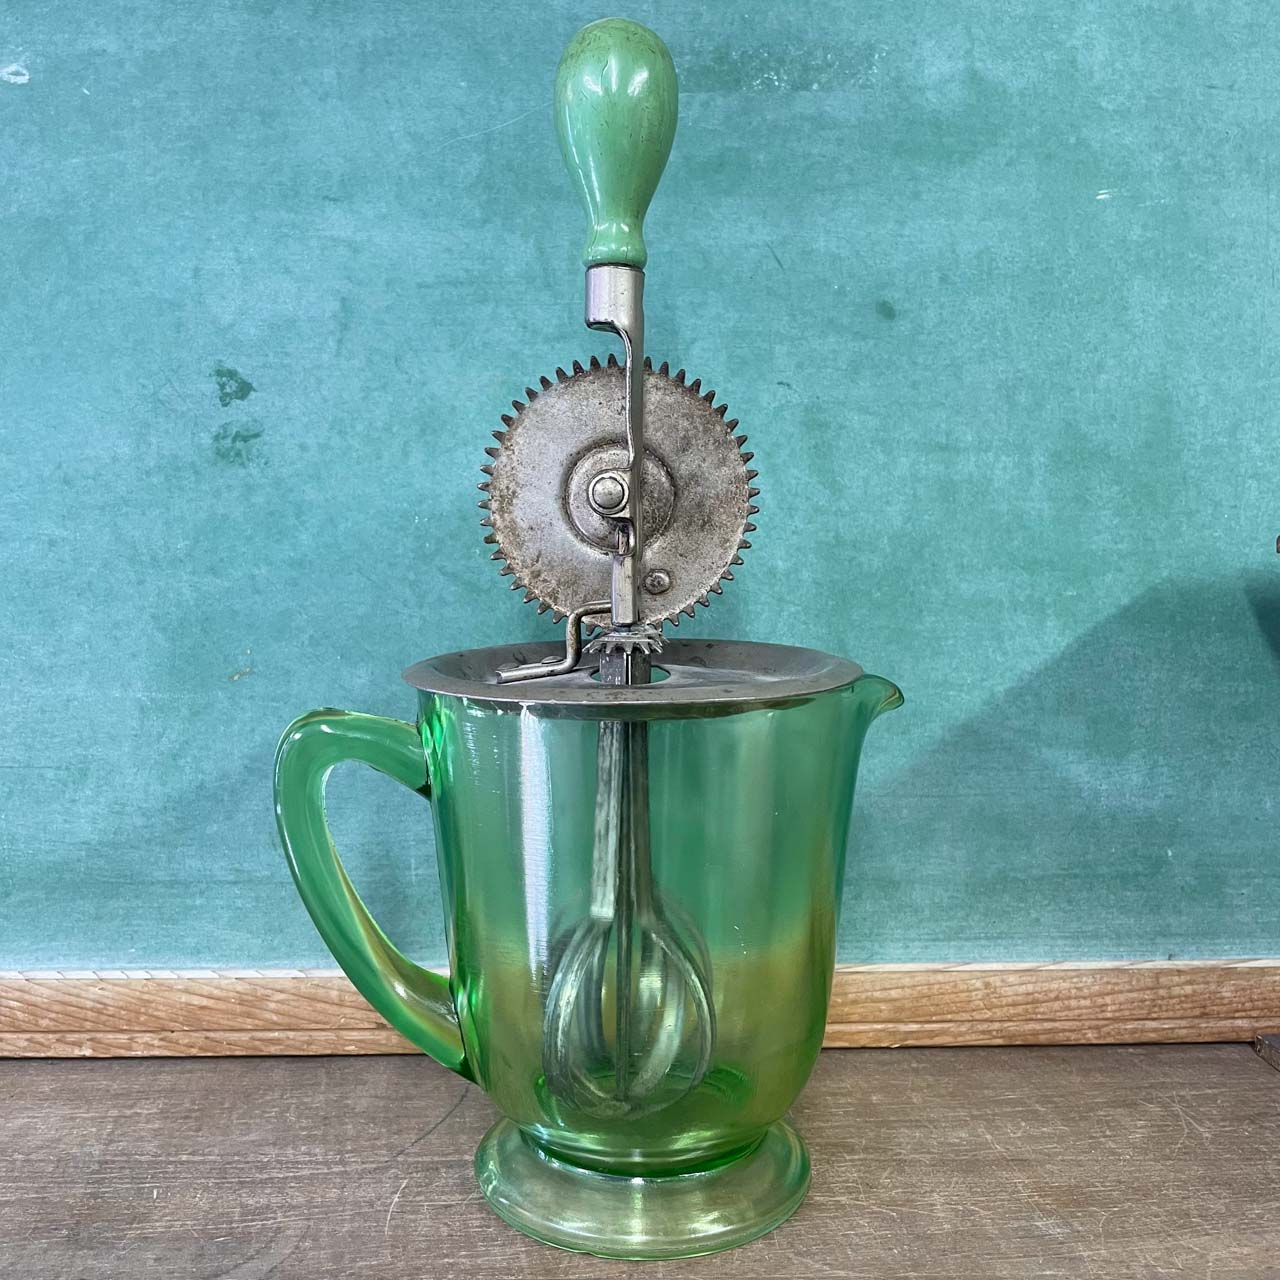 Vintage Green 4 Cup Glass Measuring Pitcher A&J Hand Mixer Beater USA  Vintage Kitchen Decor